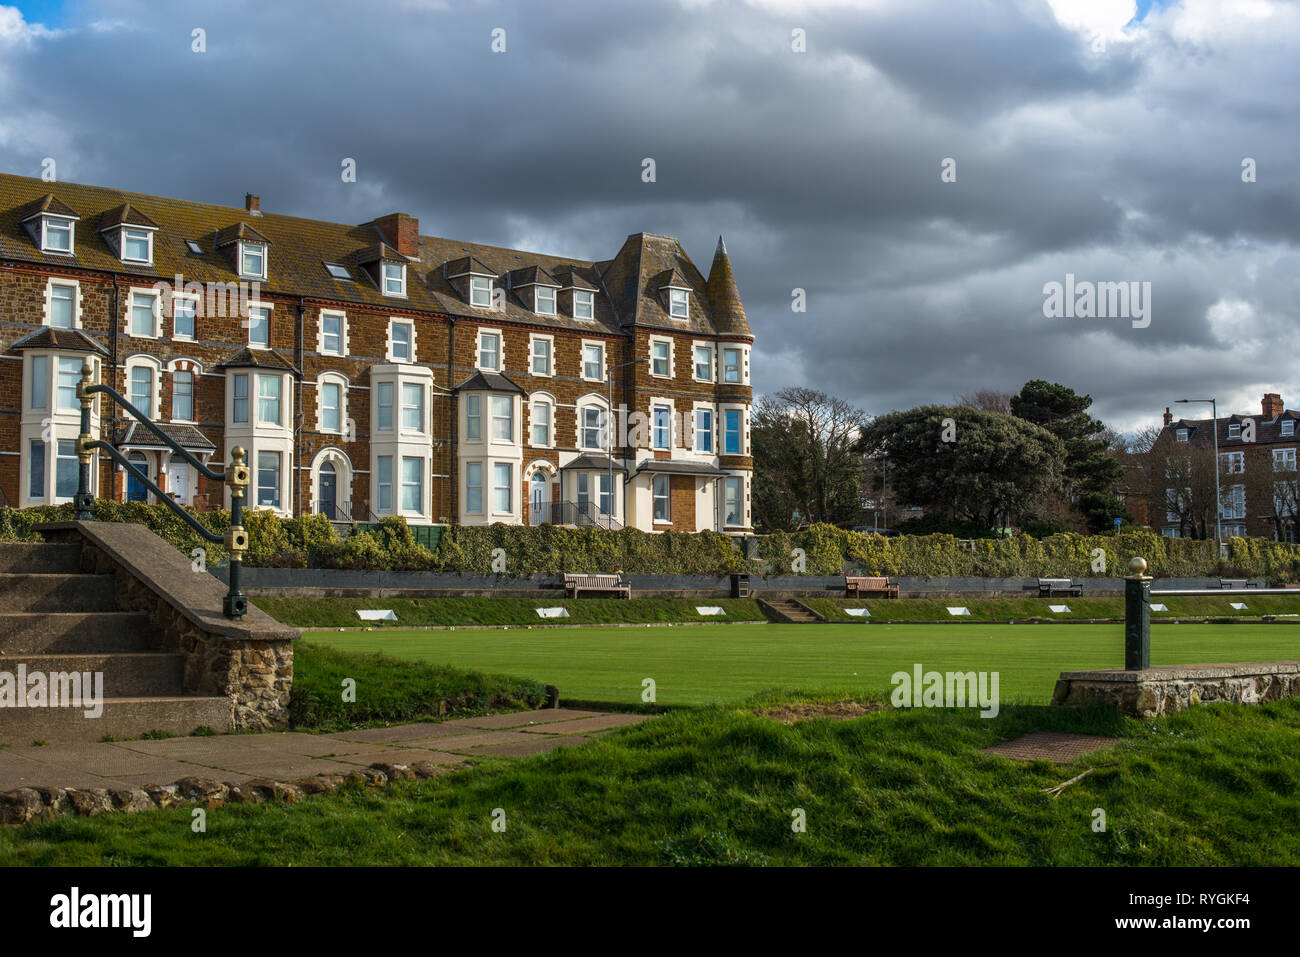 Cliff Parade bowling green and terrace of houses at Hunstanton, Norfolk Stock Photo